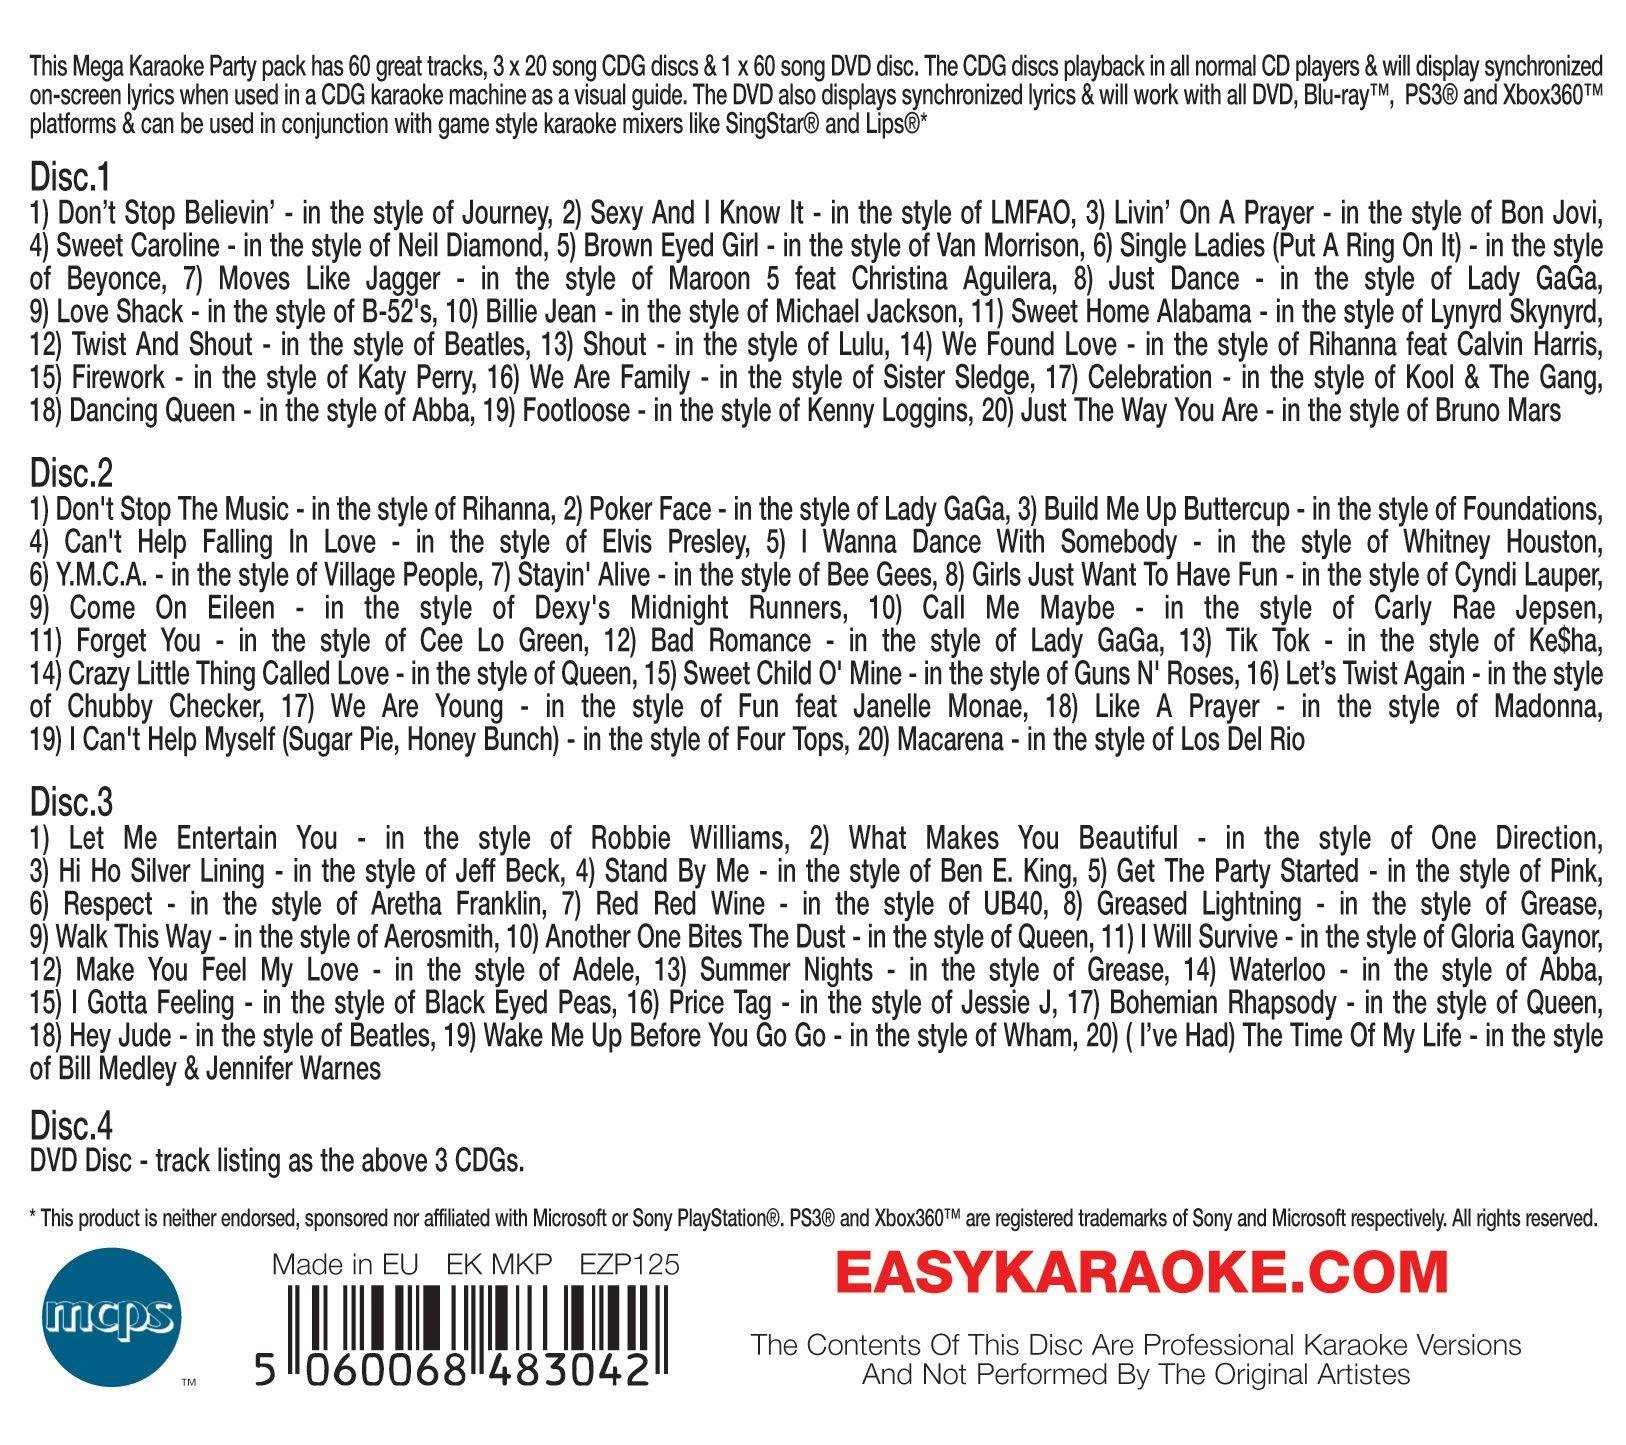 Easy Karaoke Party Hits CD+G and DVD Pack Review